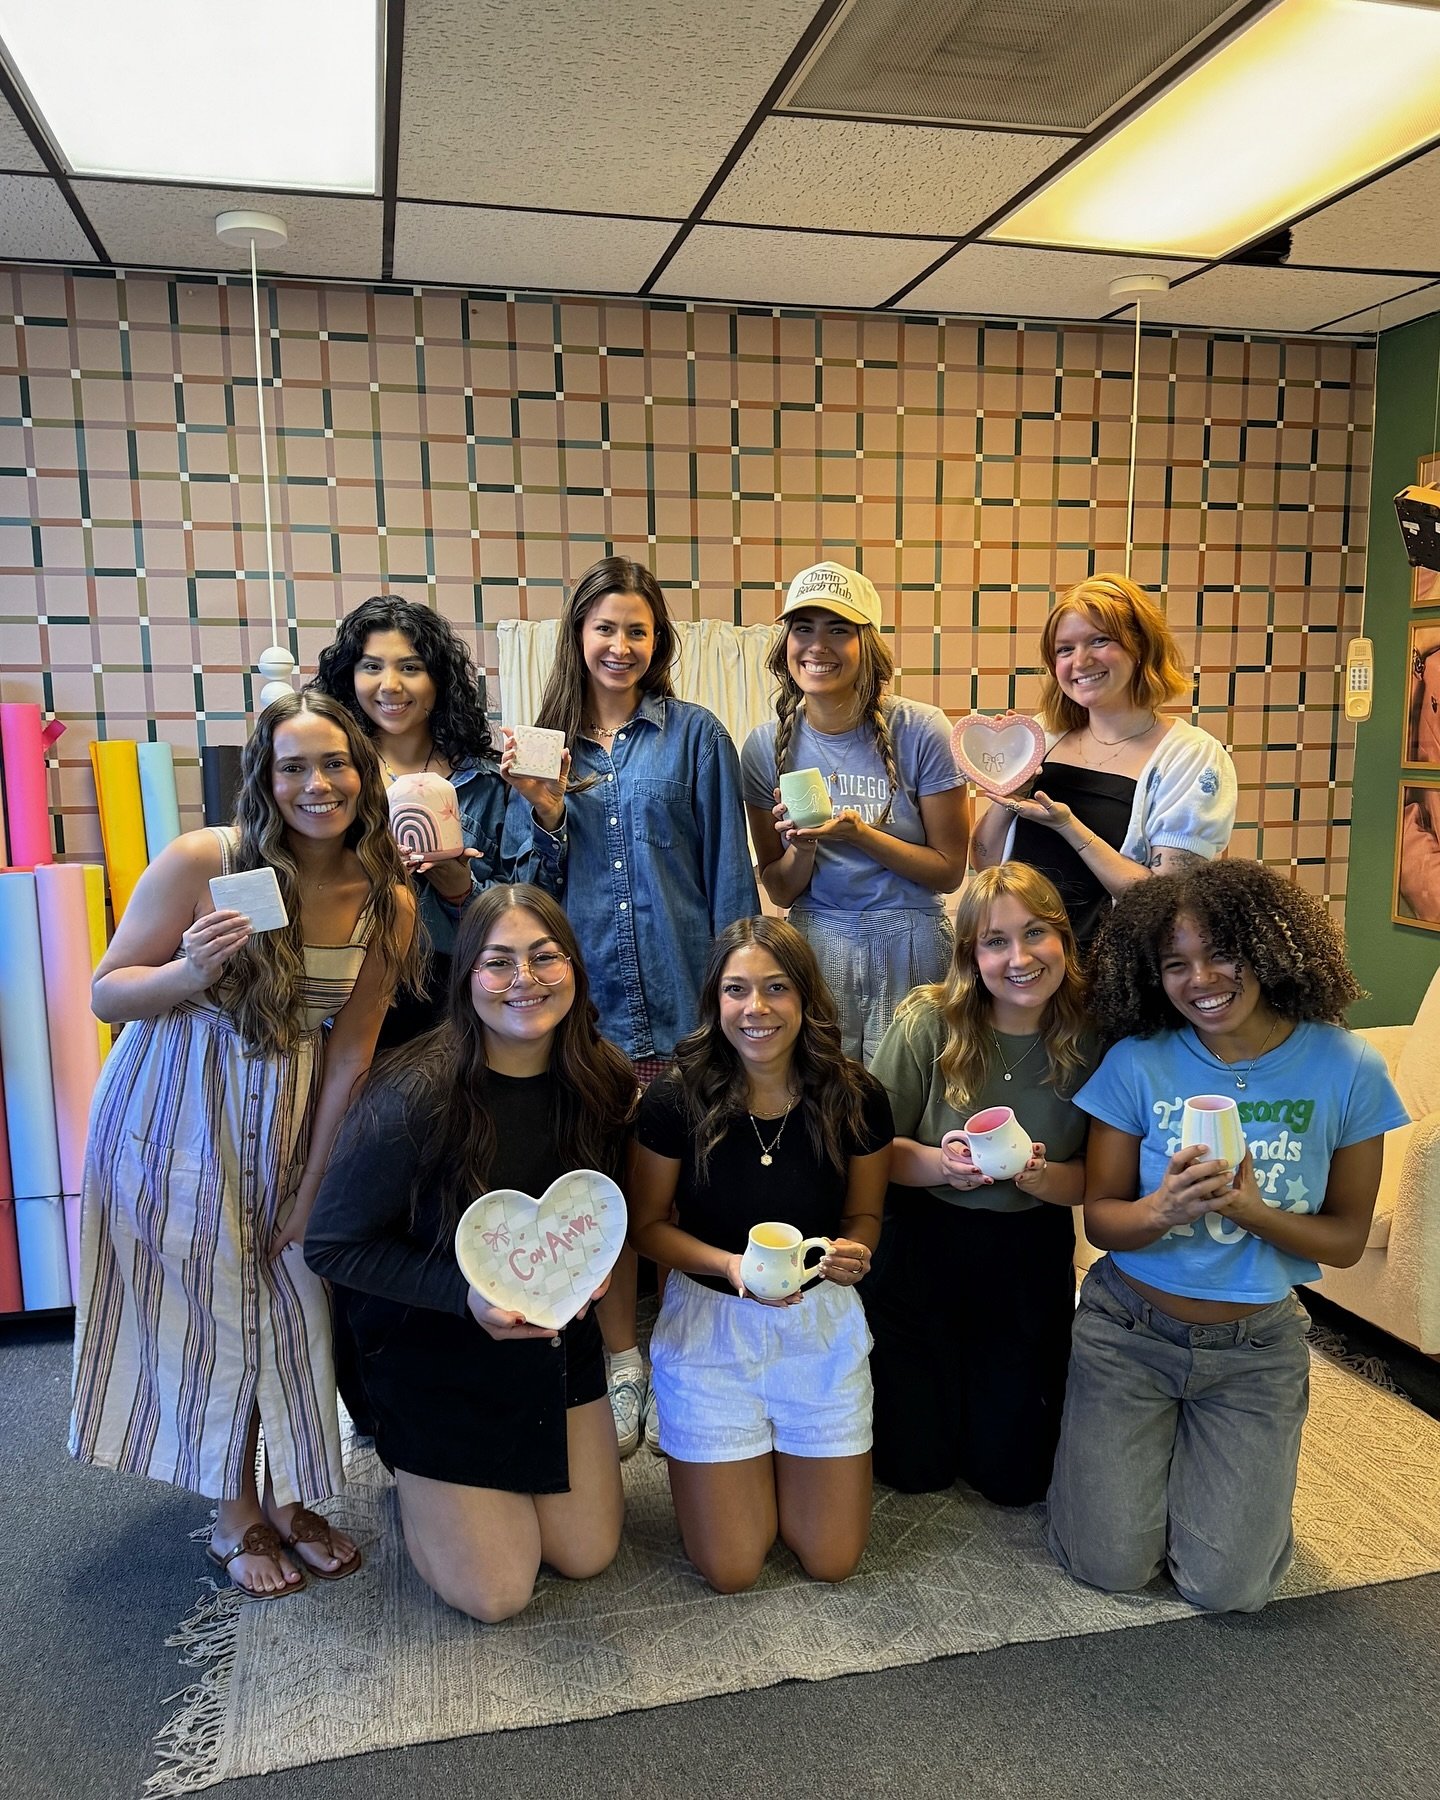 we used our creative juices a lil differently on wednesday! 🧚🏼✨🎨 @asyouwishpottery stopped by for a fun lil pottery + painting sesh. more office days like this pls??